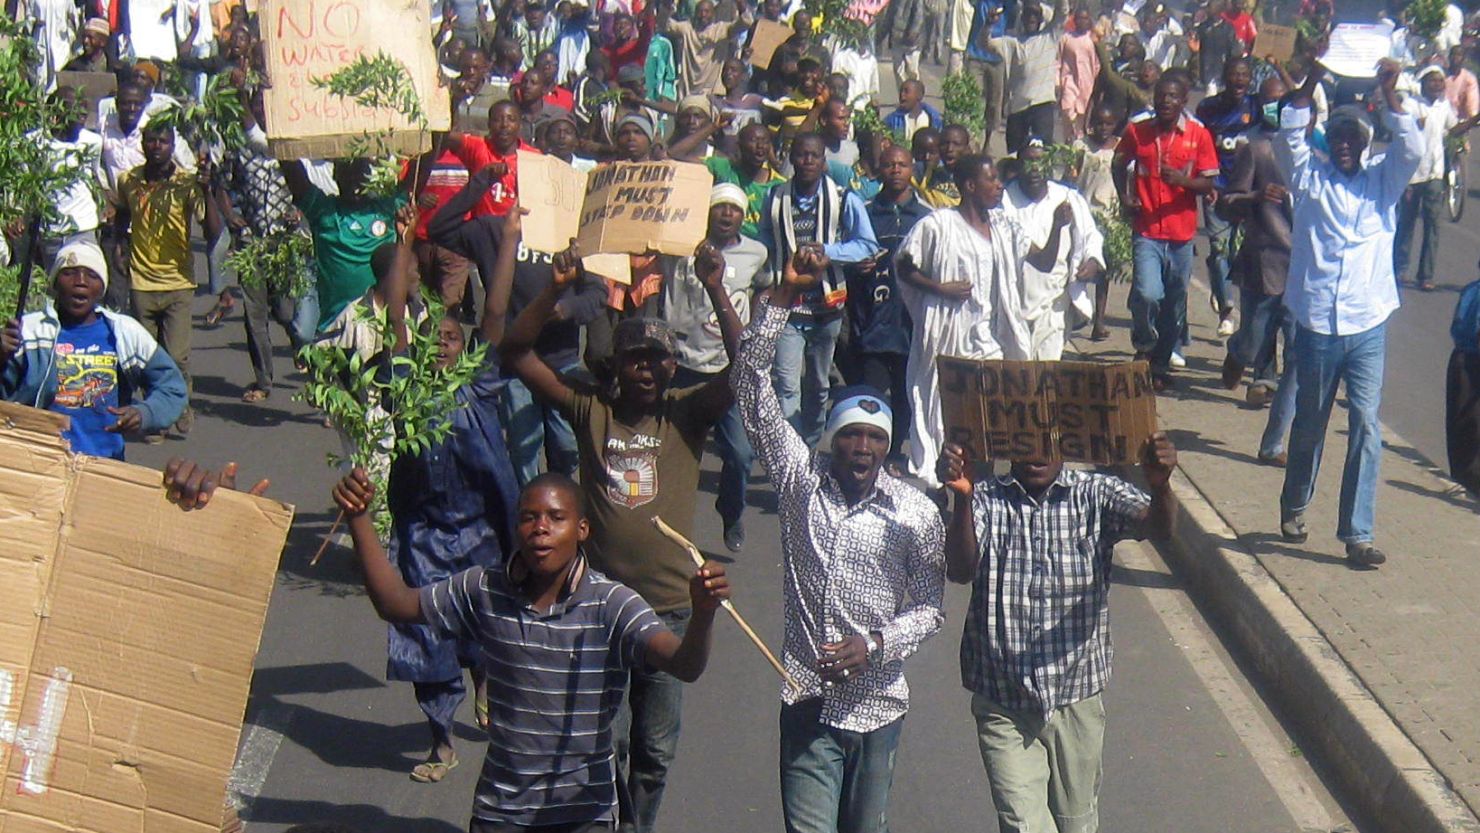 Thousands of youth activists, Labour workers, Universities Staff union protesting against Fuel price hike in Nigeria.